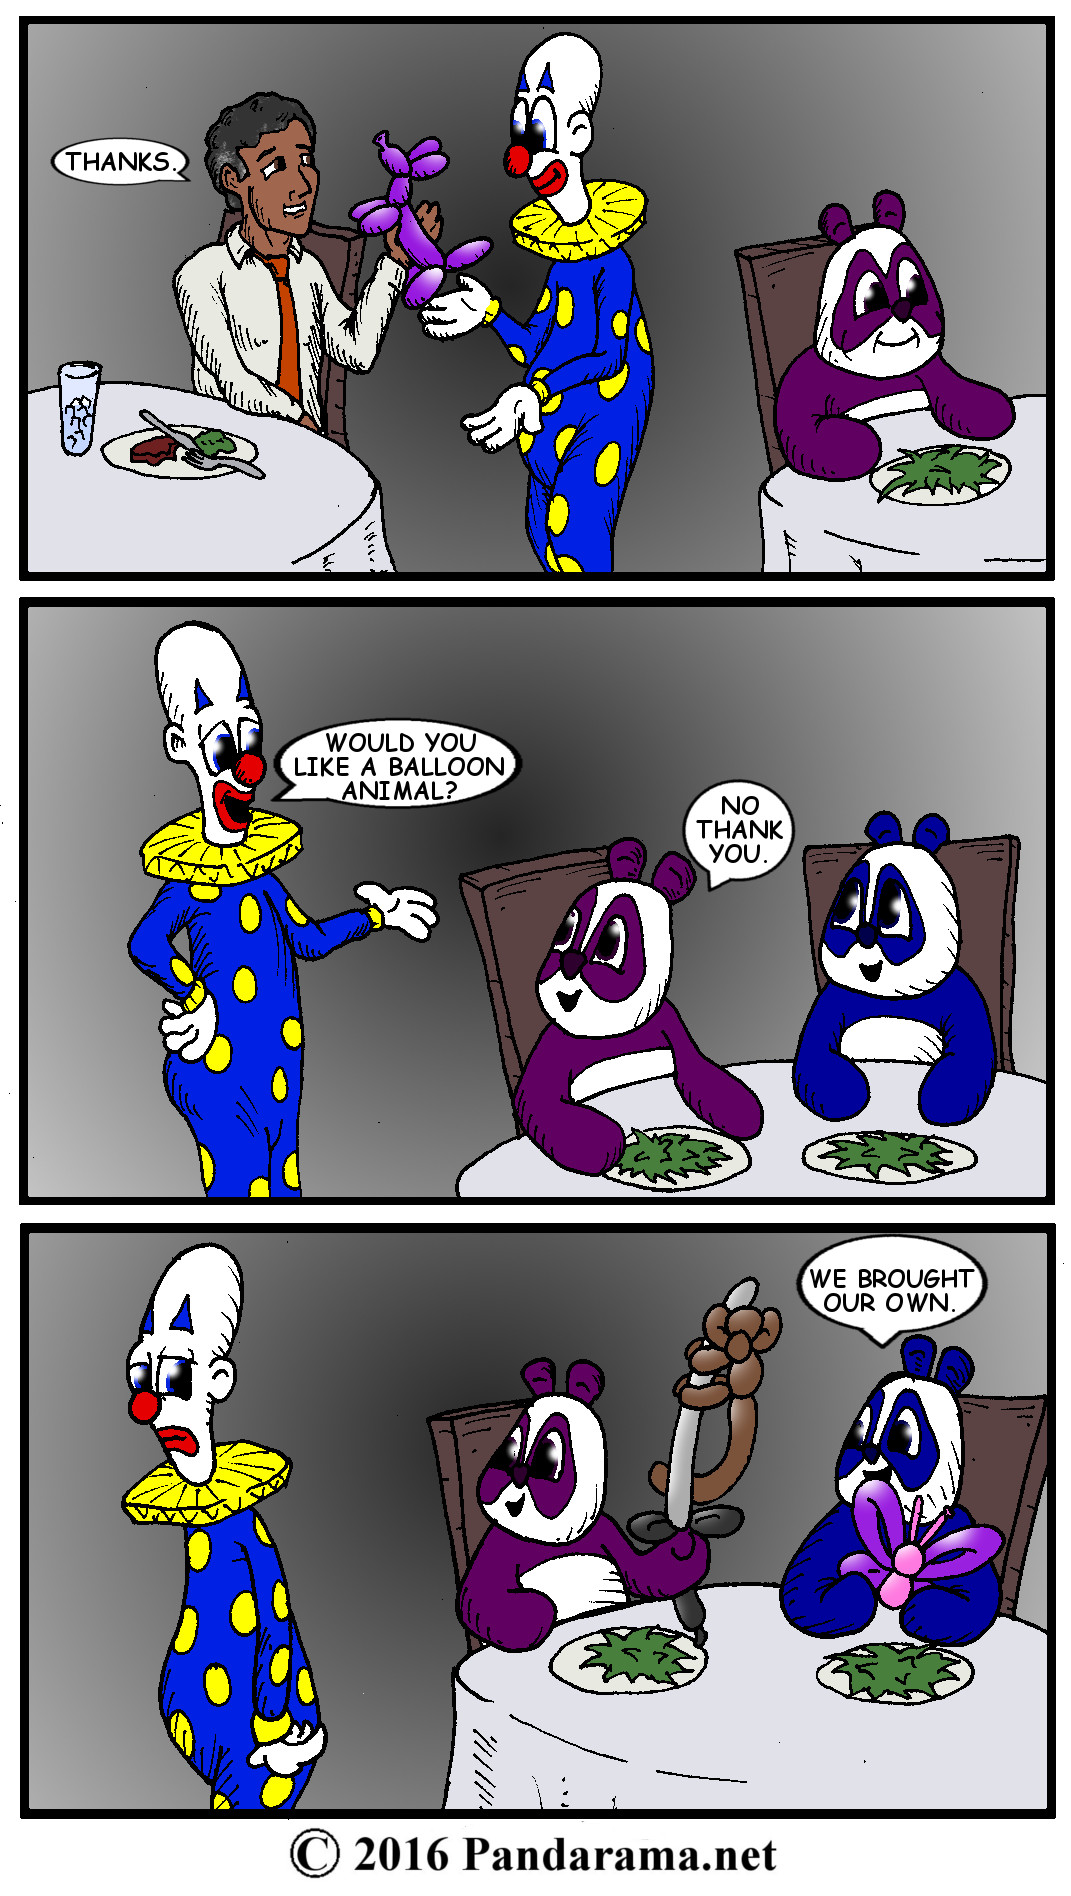 pandarama comic of clown offering to make balloon animals for pandas at a restaraunt, but pandas brought their own.